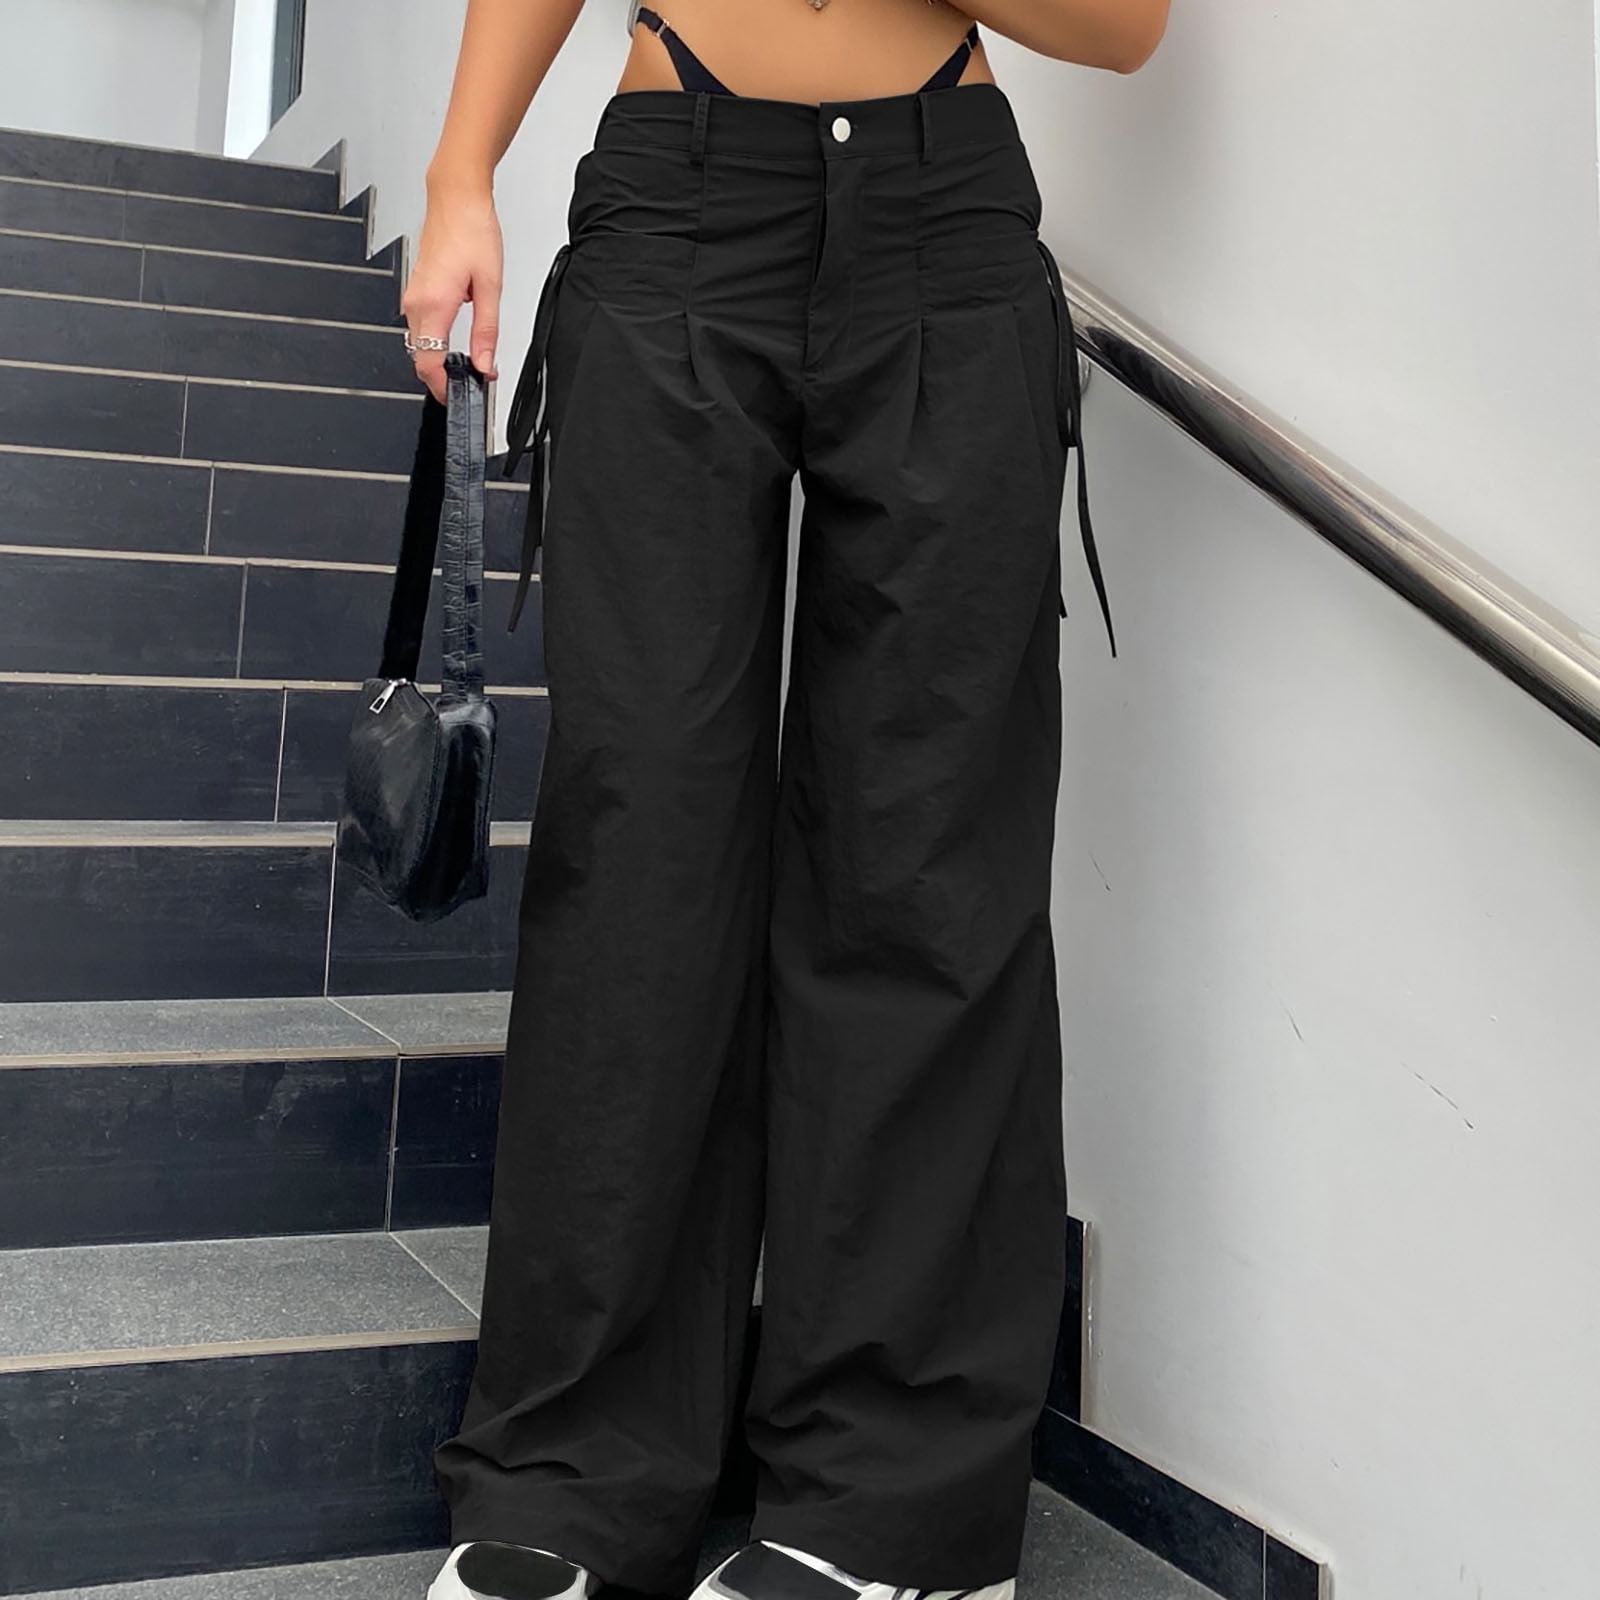 SELONE Low Style Size Pant Waist Everyday Women Multi Fashion Overalls Black Low Sports Pants Cargo Wear Long for Pants Street Sense Trendy Pockets Running Design Athletic Rise Workout With Plus Y2K